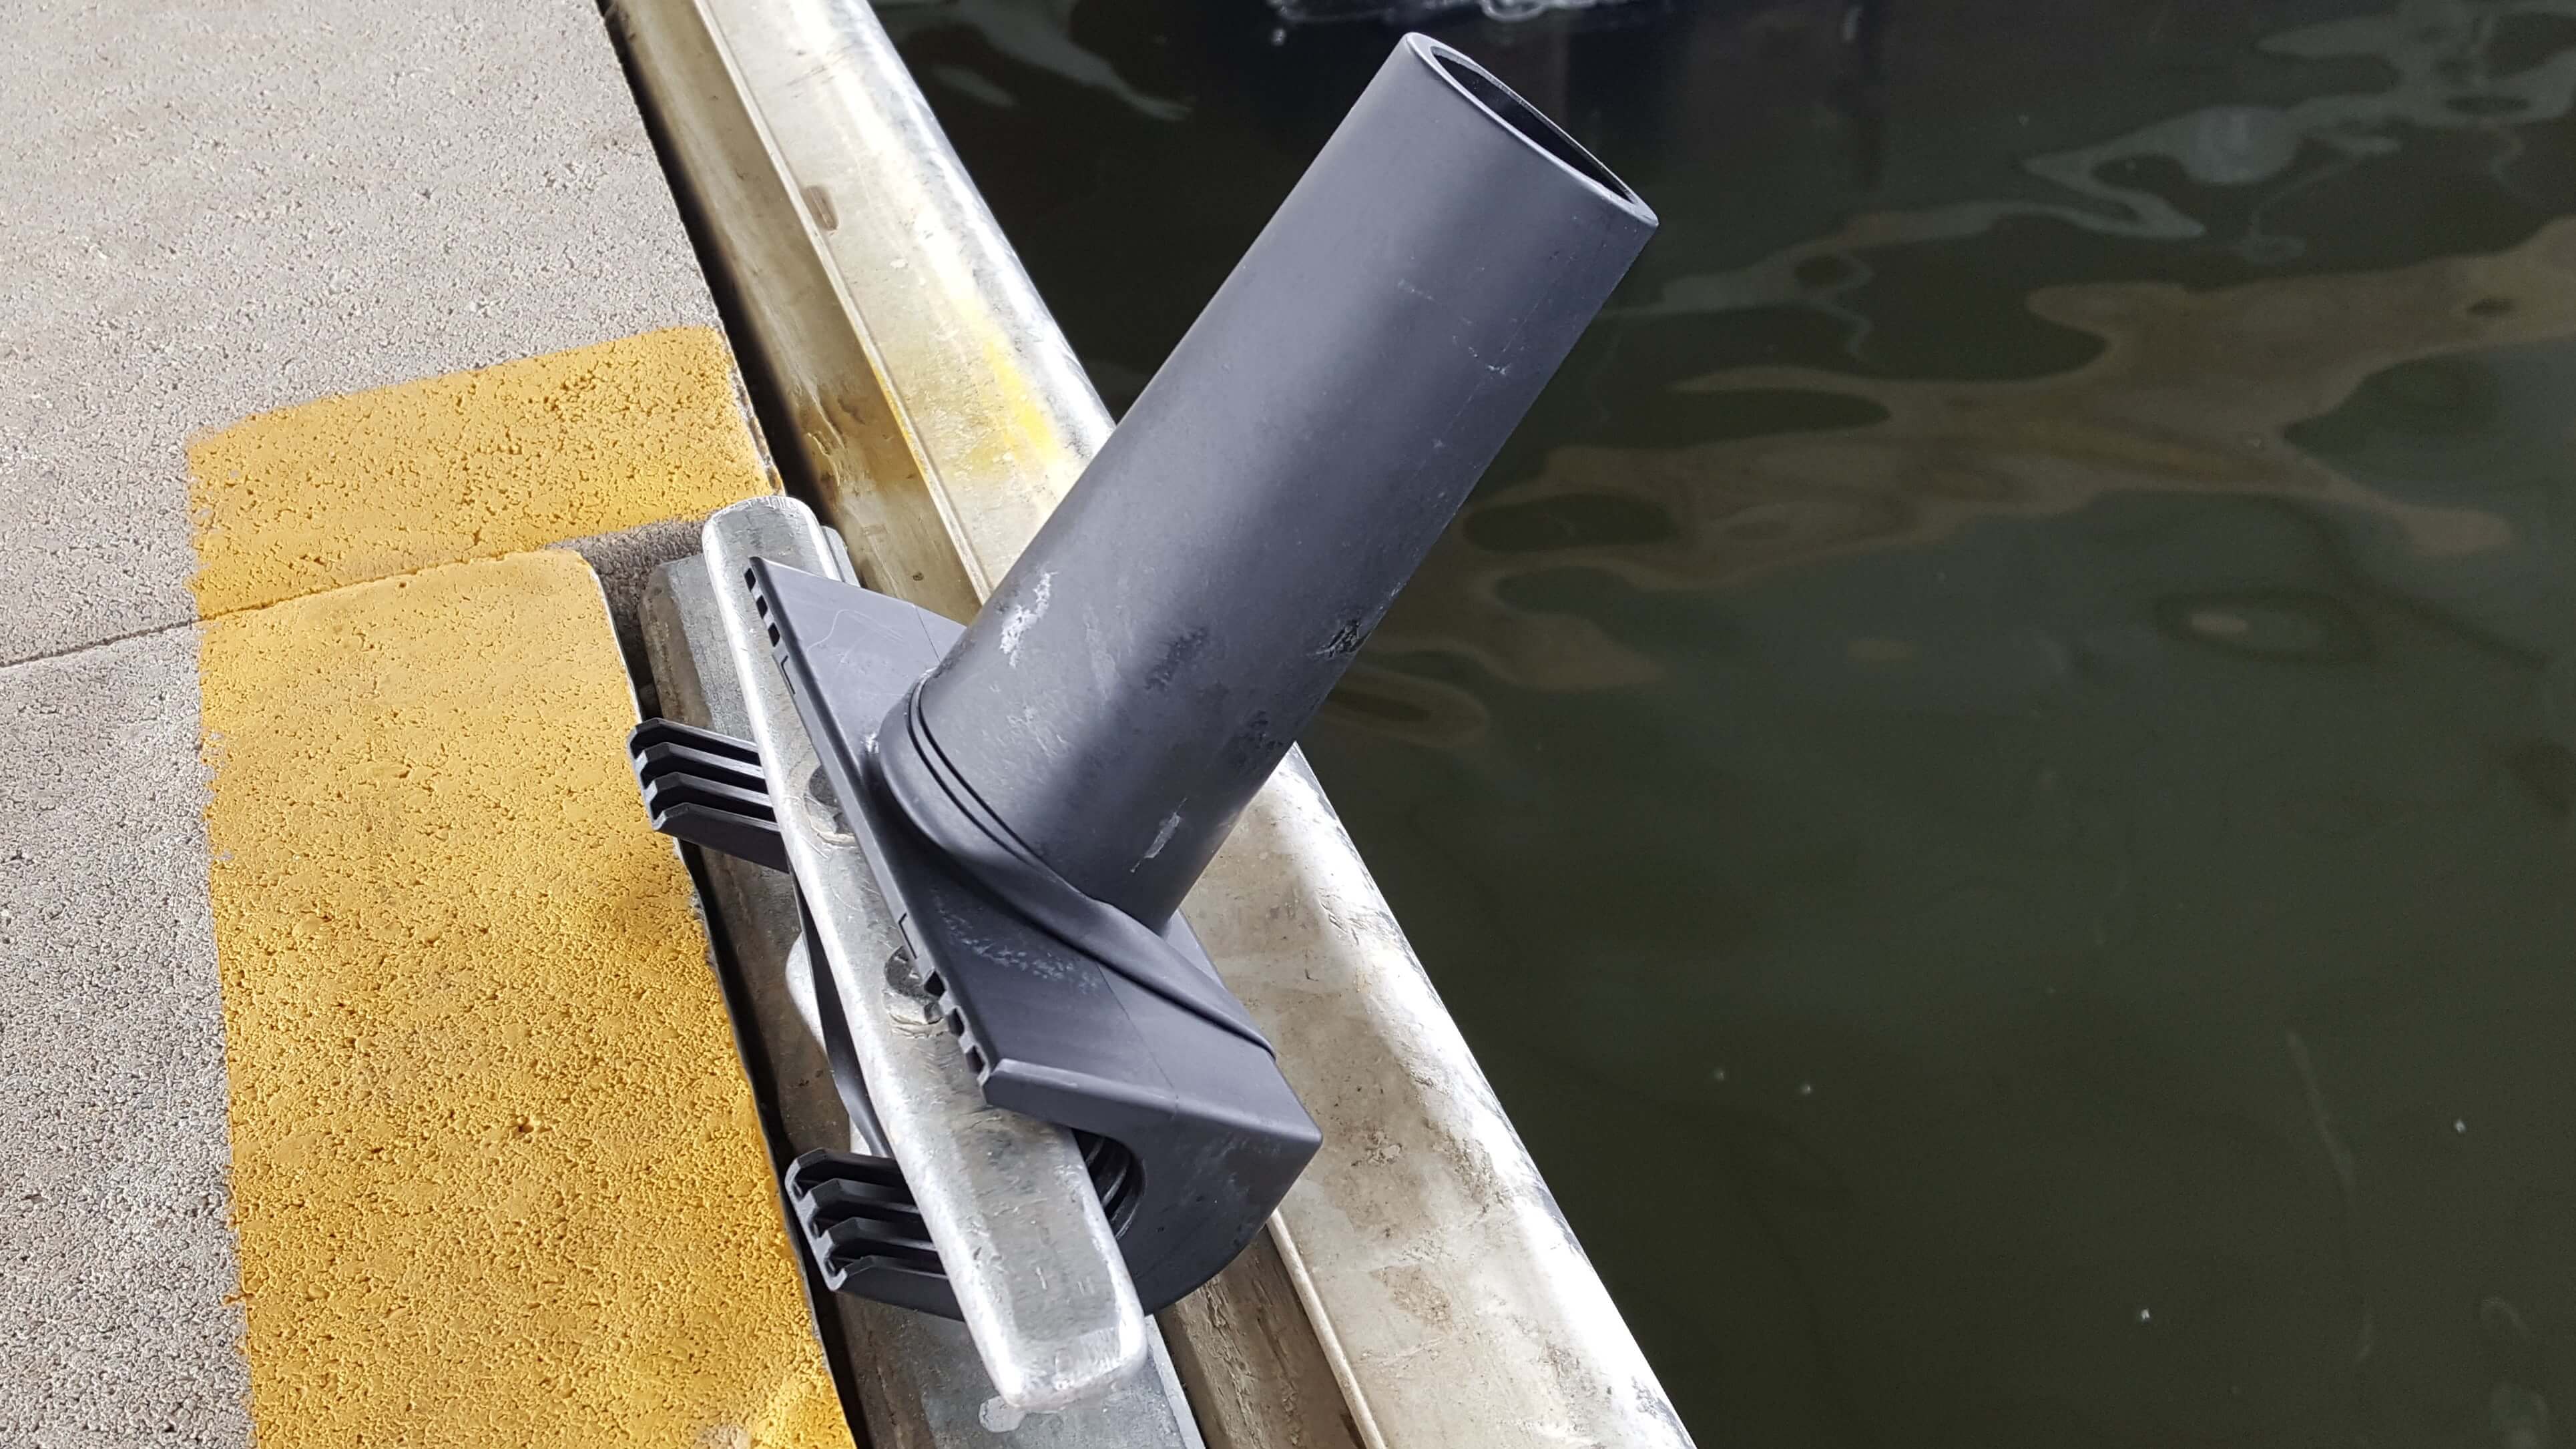 Best fishing rod holder for boats and docks.